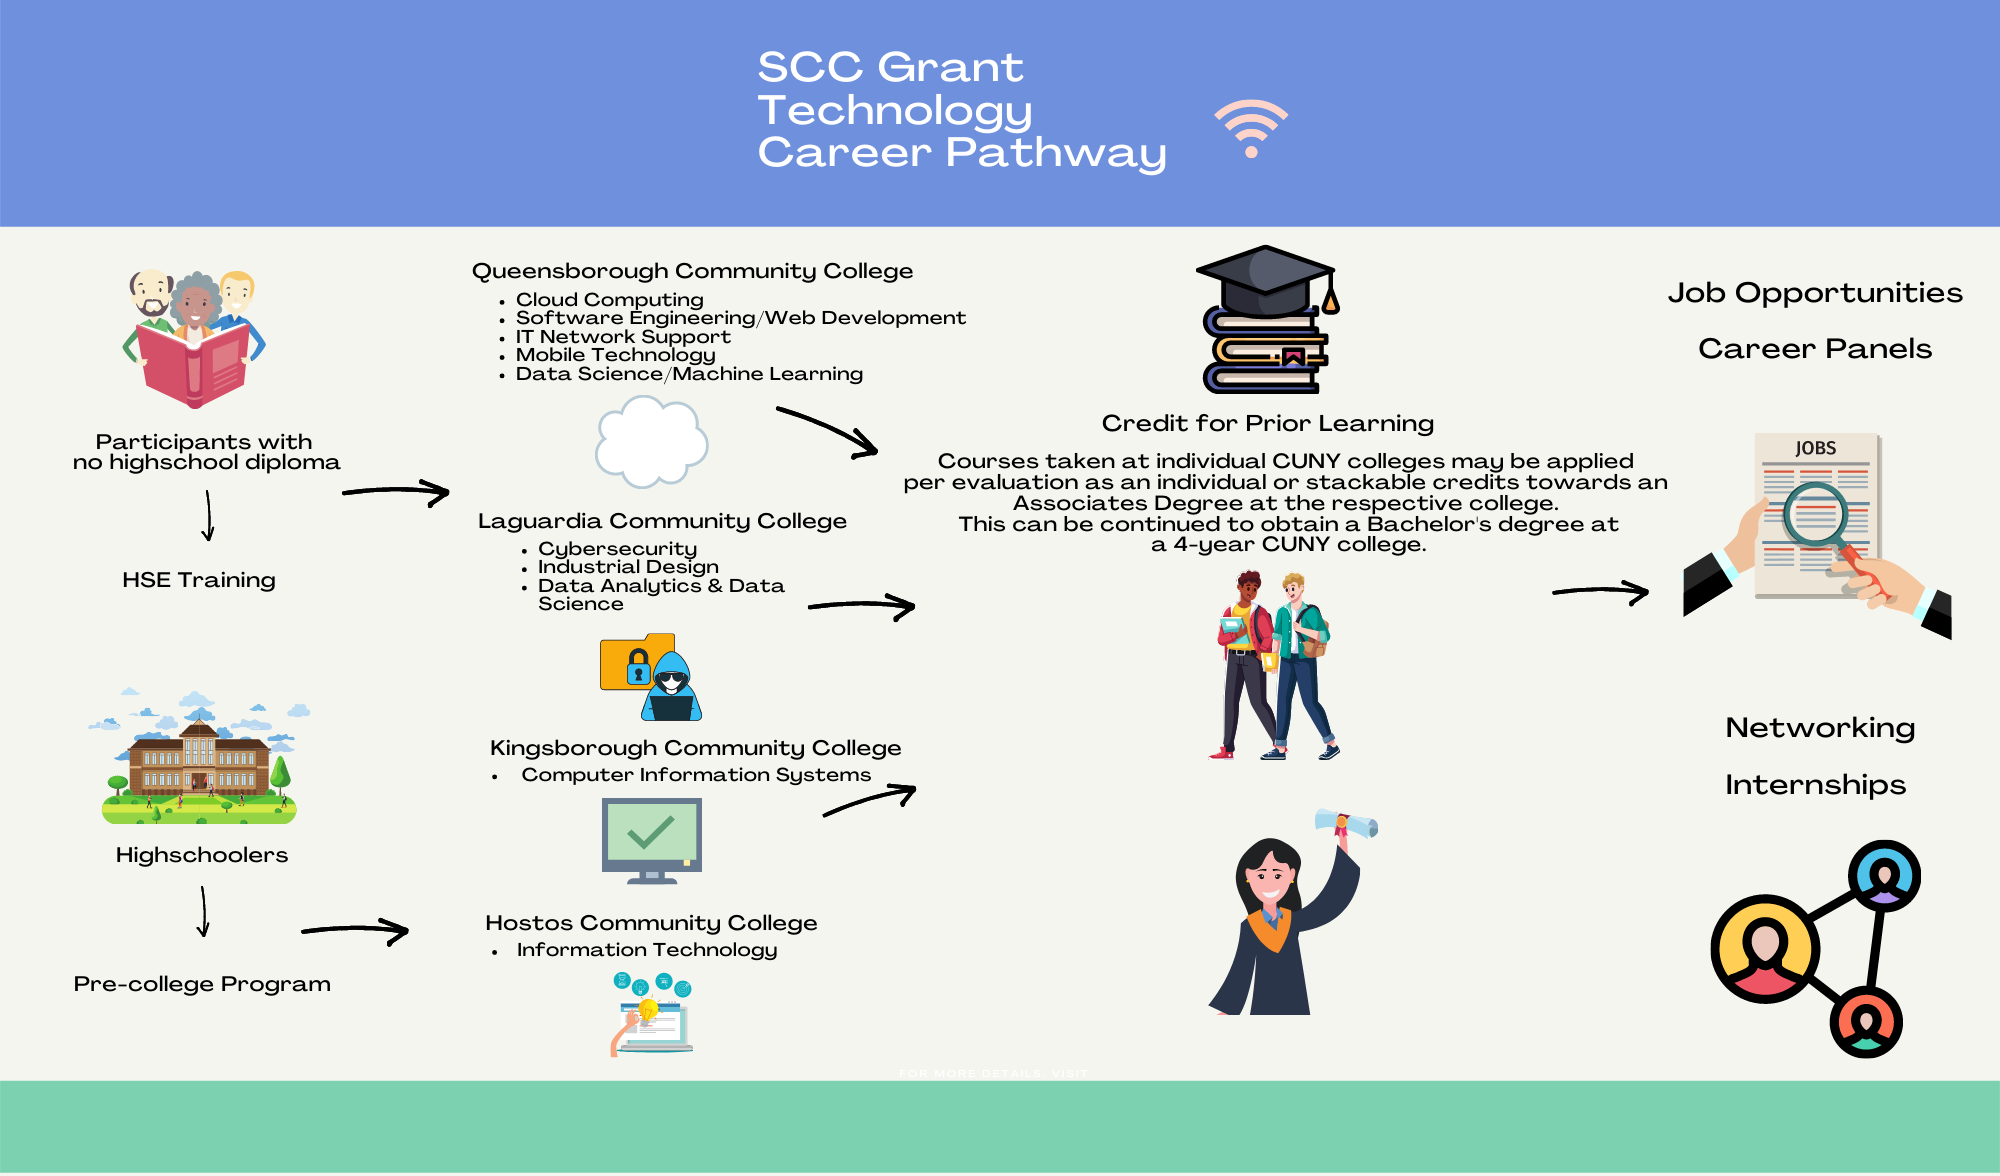 SCC Grant Technology Career Pathway